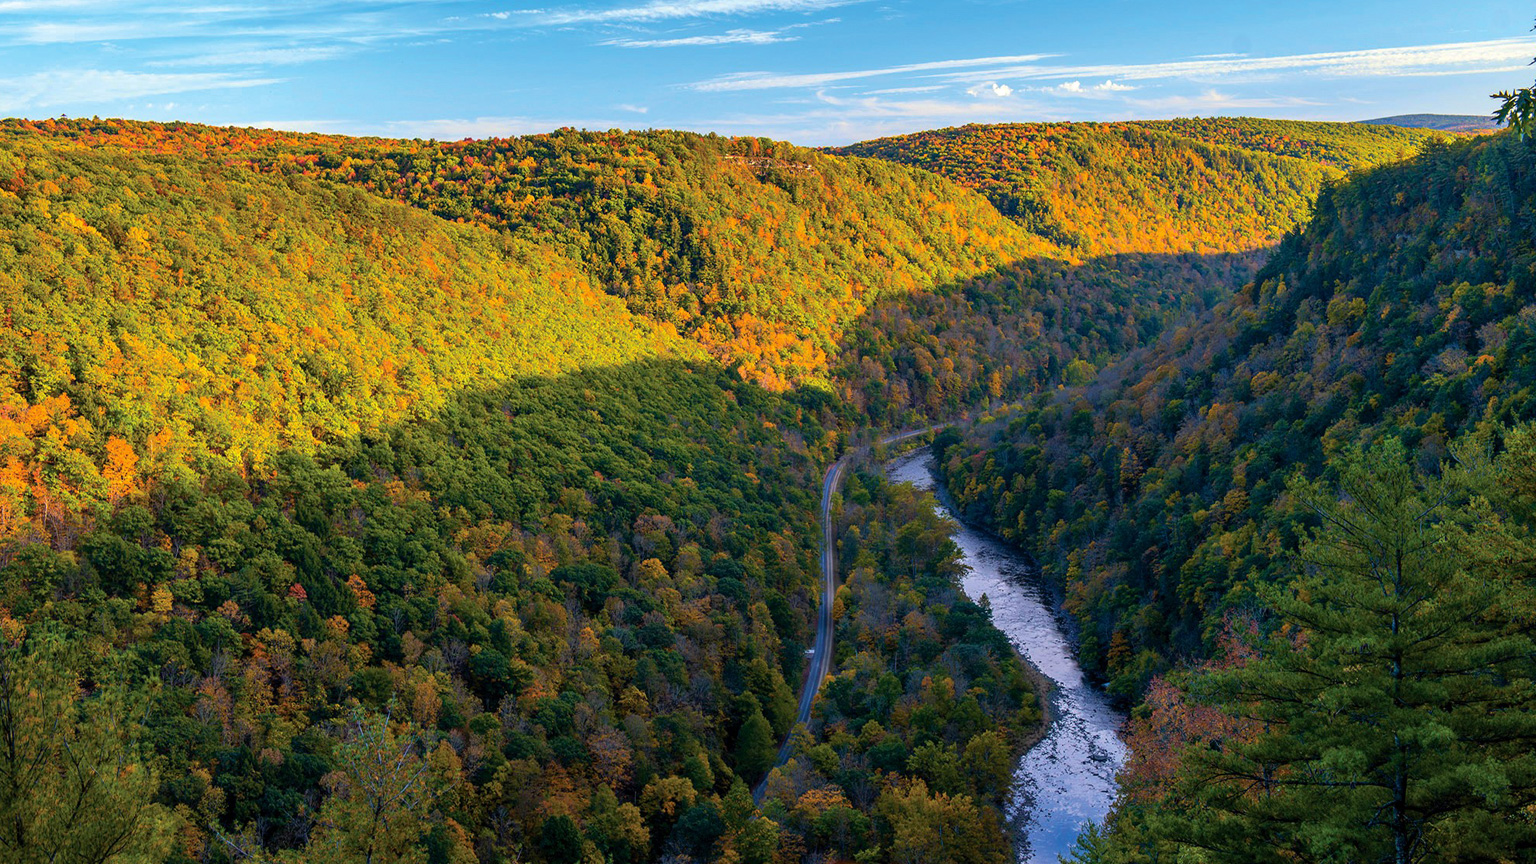 Visit Potter-Tioga Wellsboro, Pennsylvania Named Ninth Best Fall Town in the U.S. for Foliage